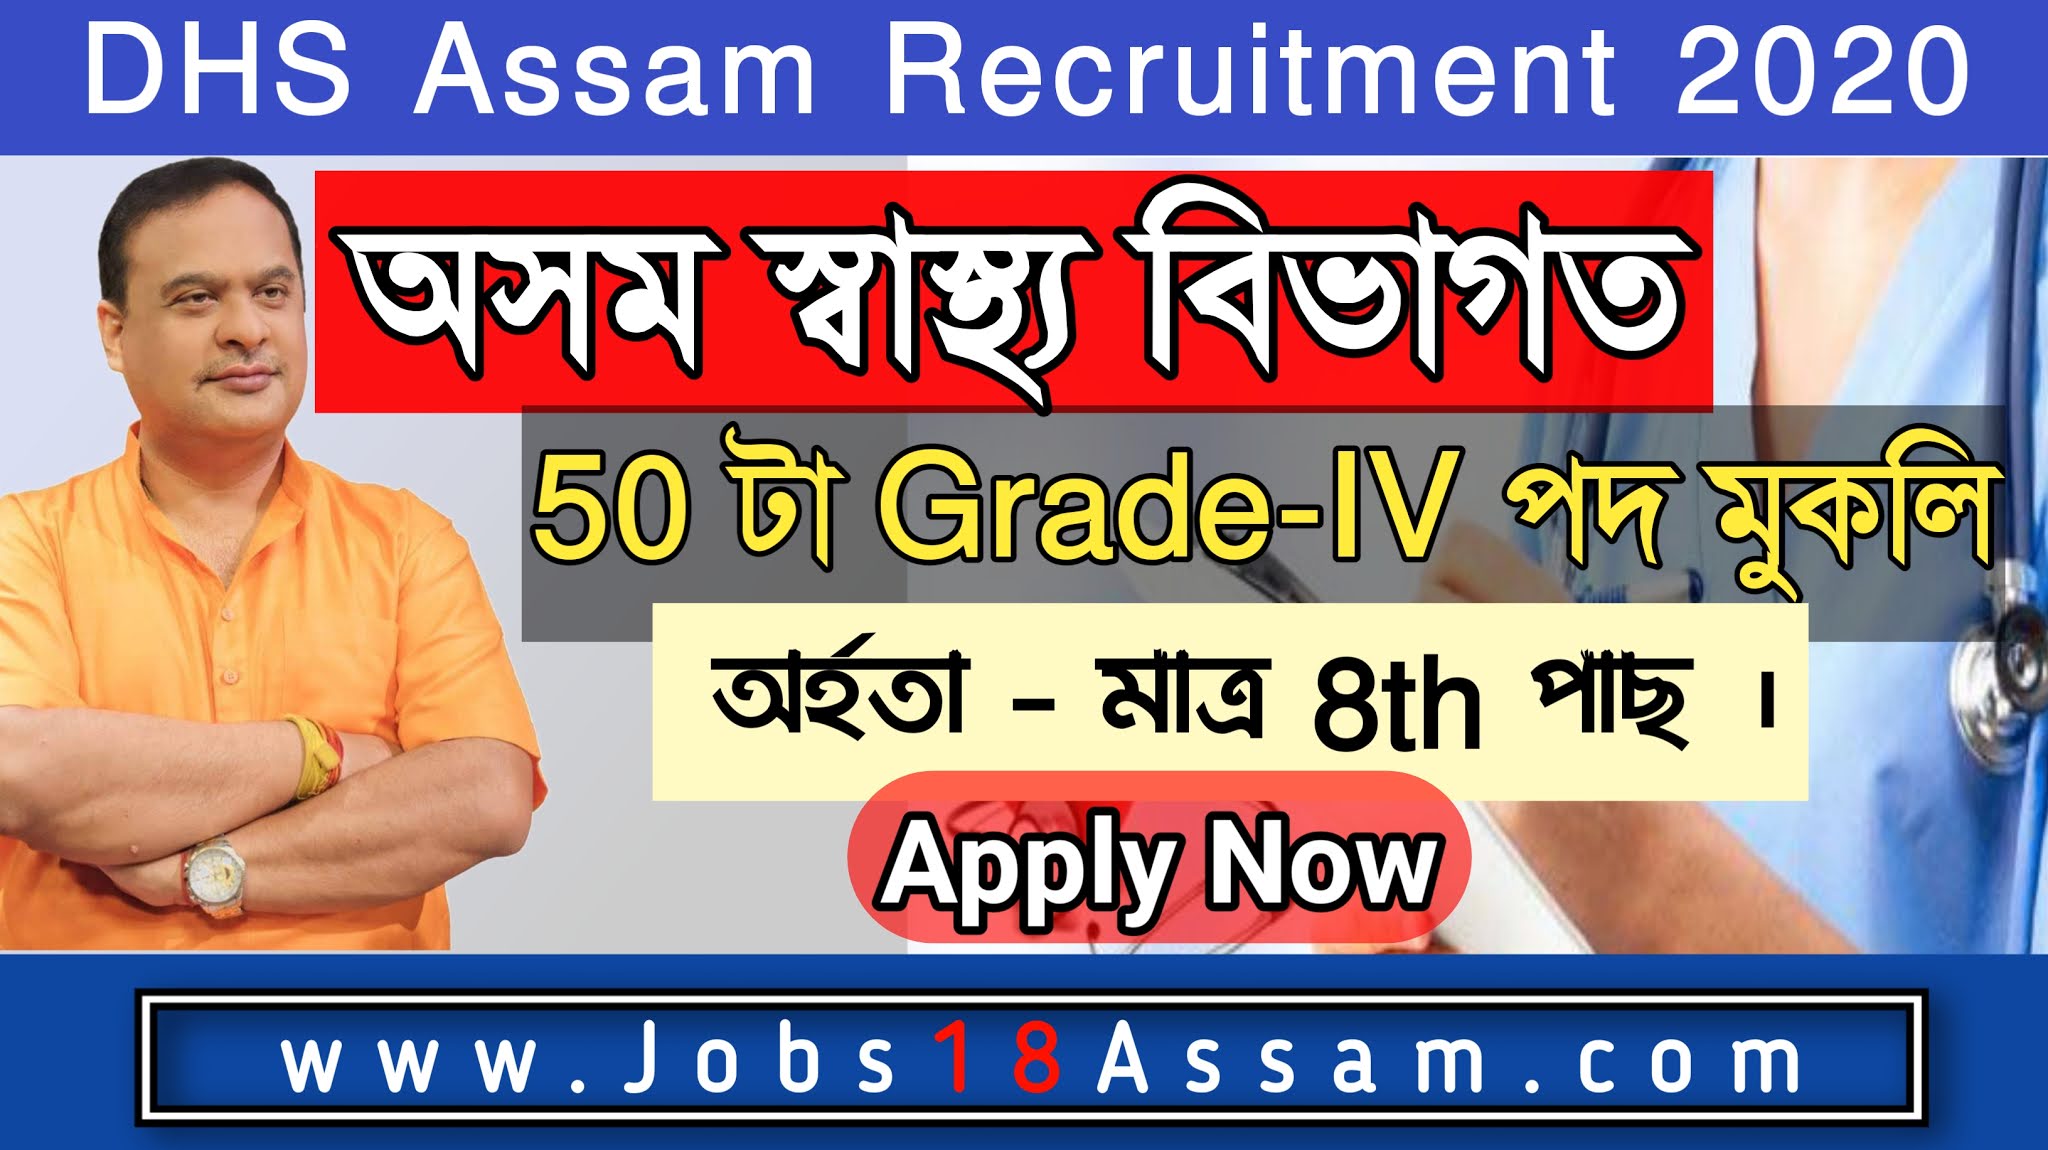 DHS Assam-Directorate of Health services, Assam